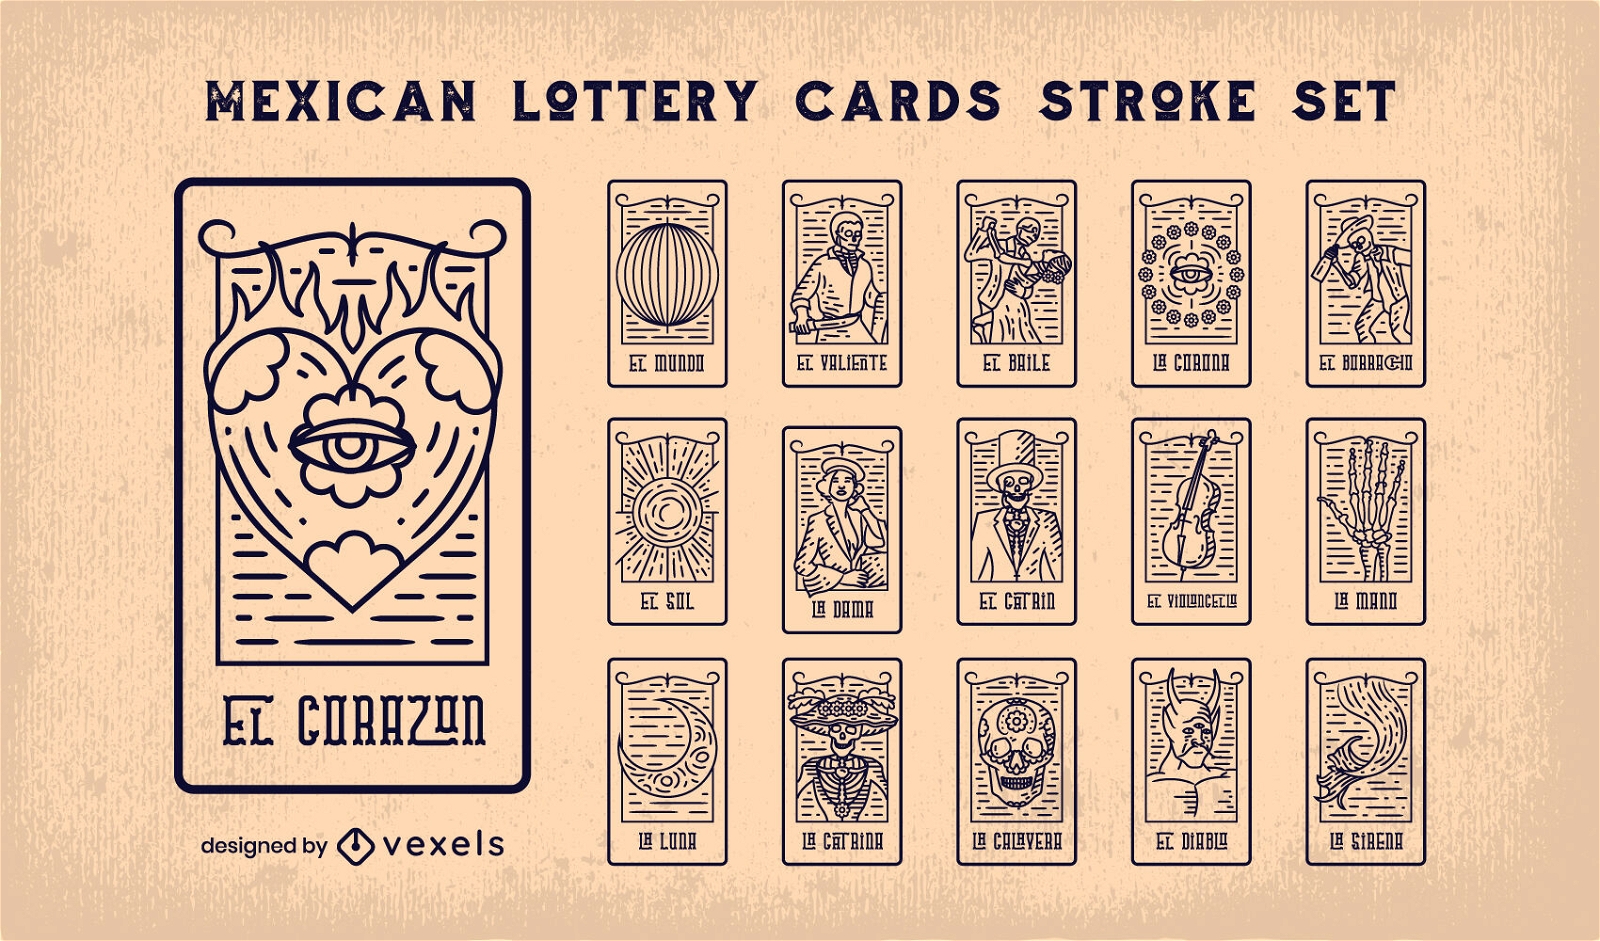 Mexican lottery cards stroke set